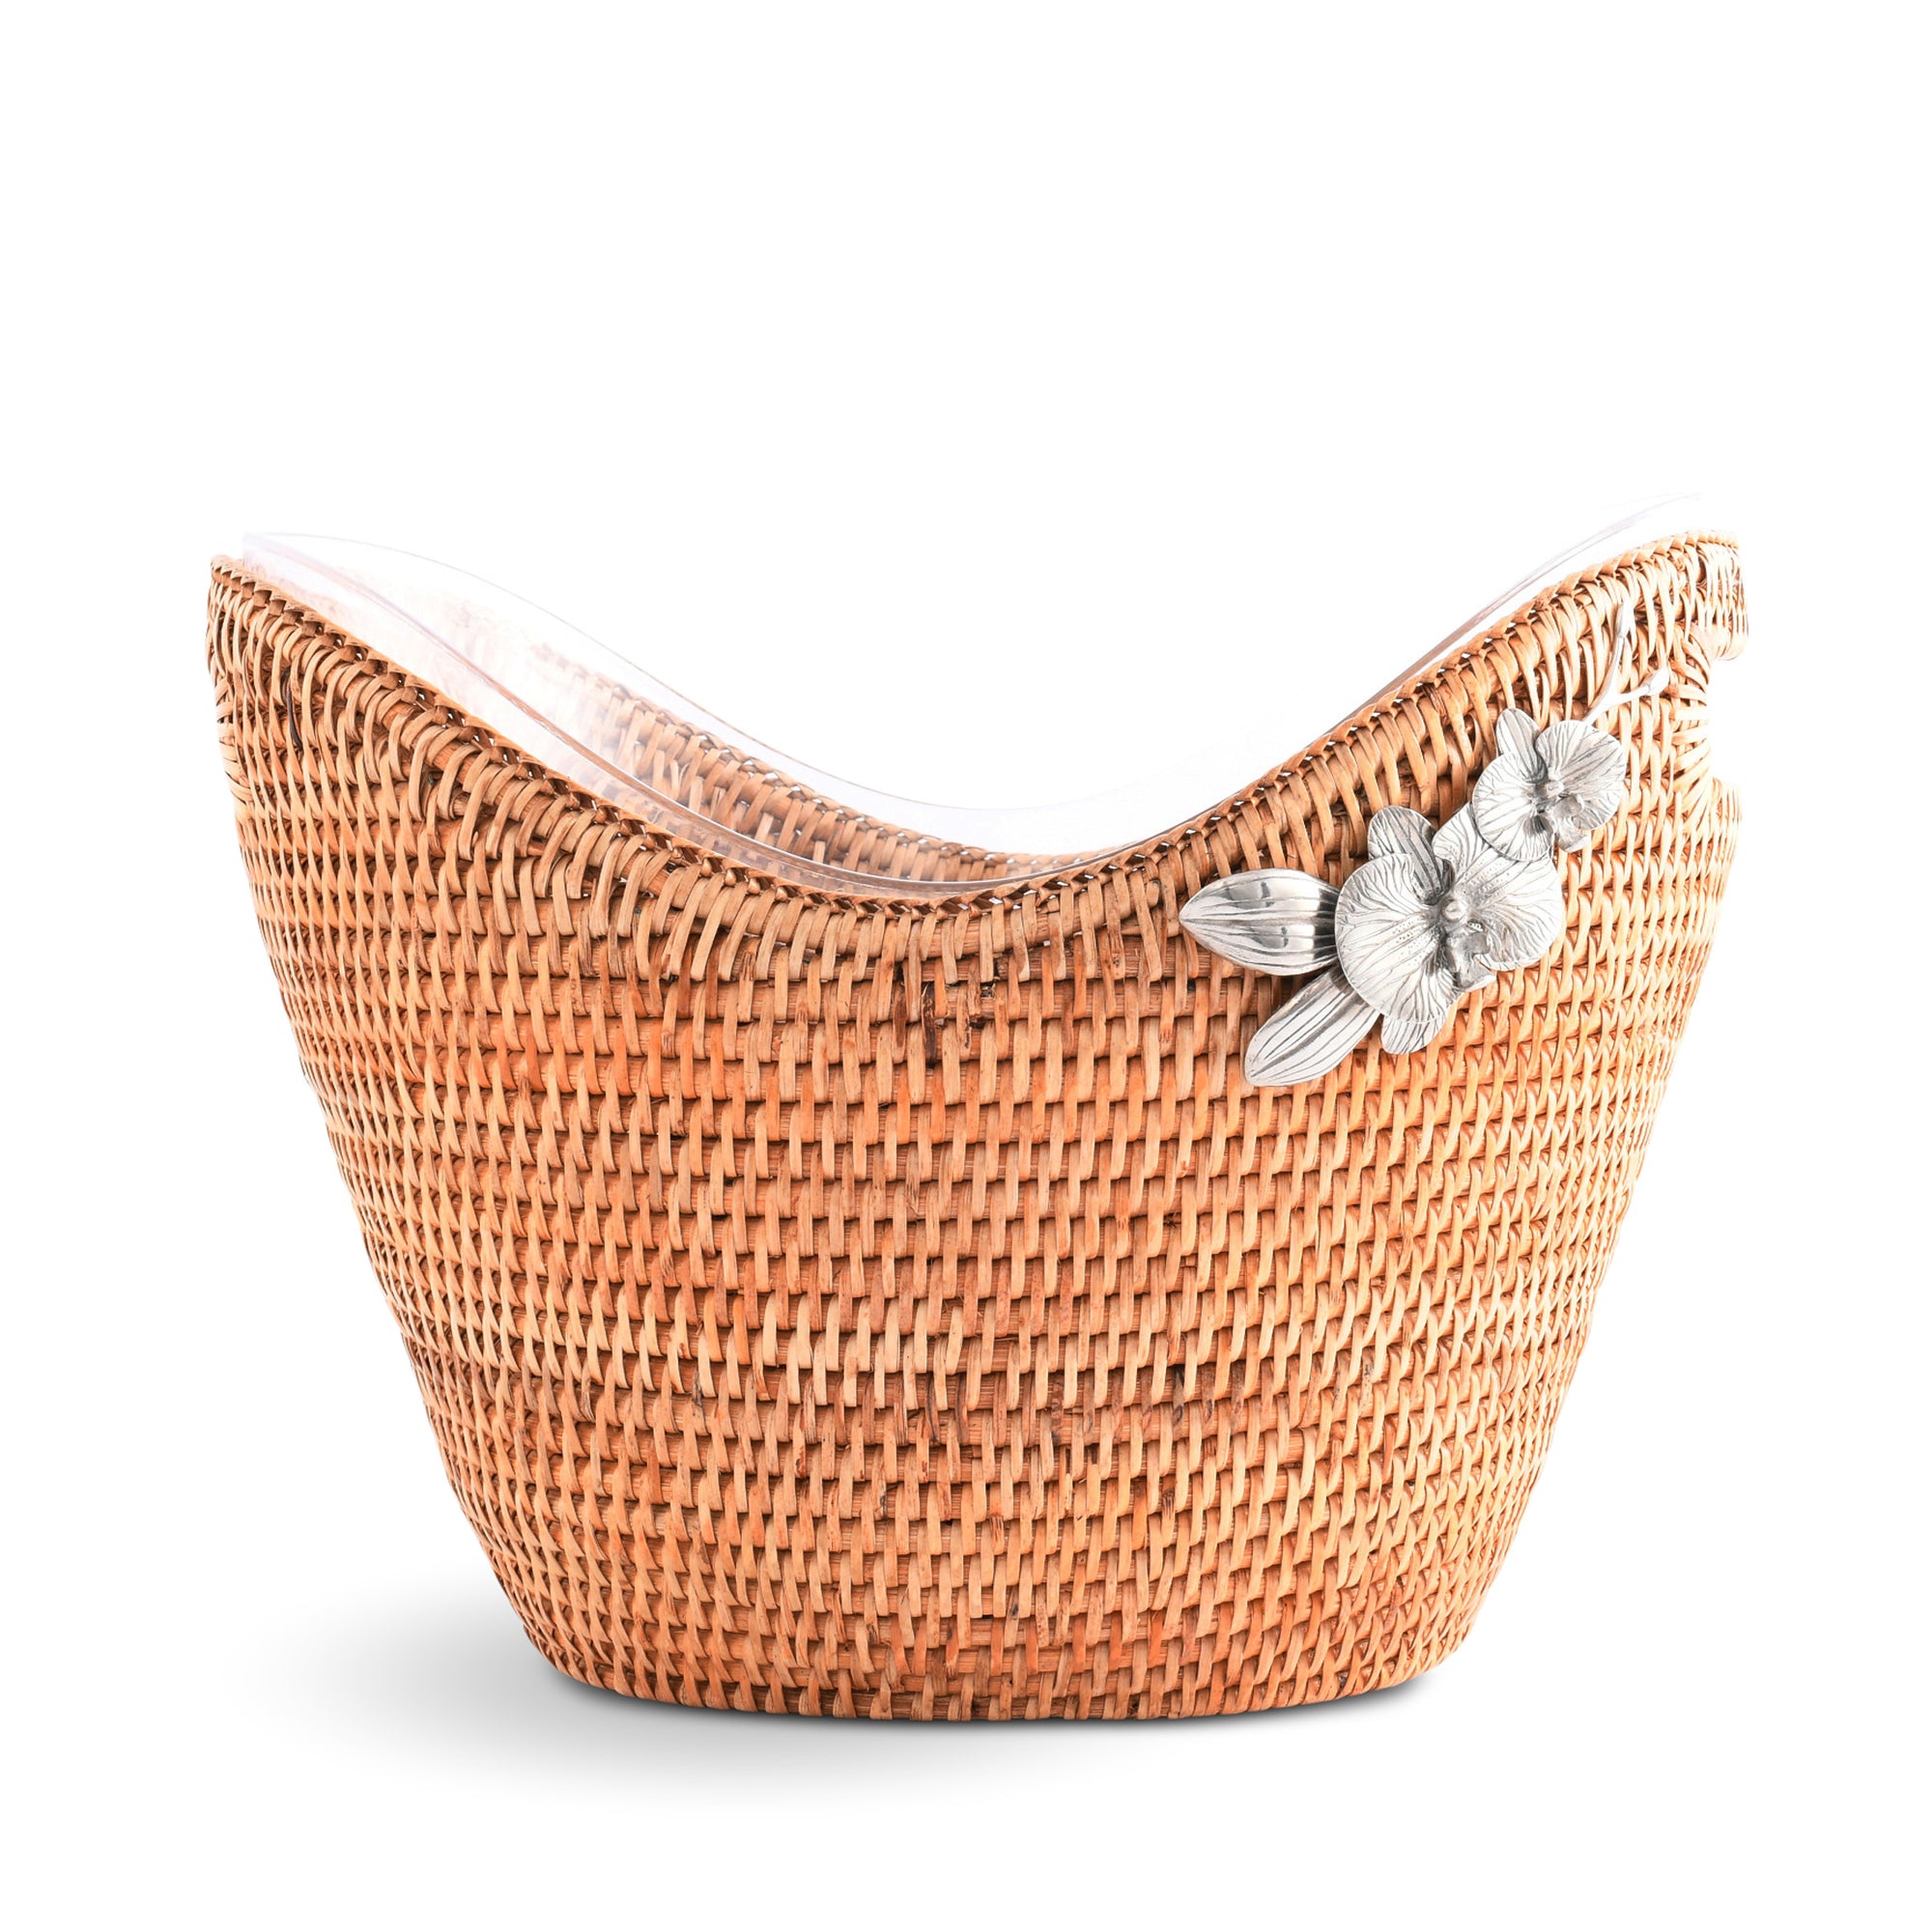 Vagabond House Orchids Hand Woven Wicker Rattan Champagne / Ice Tub Product Image